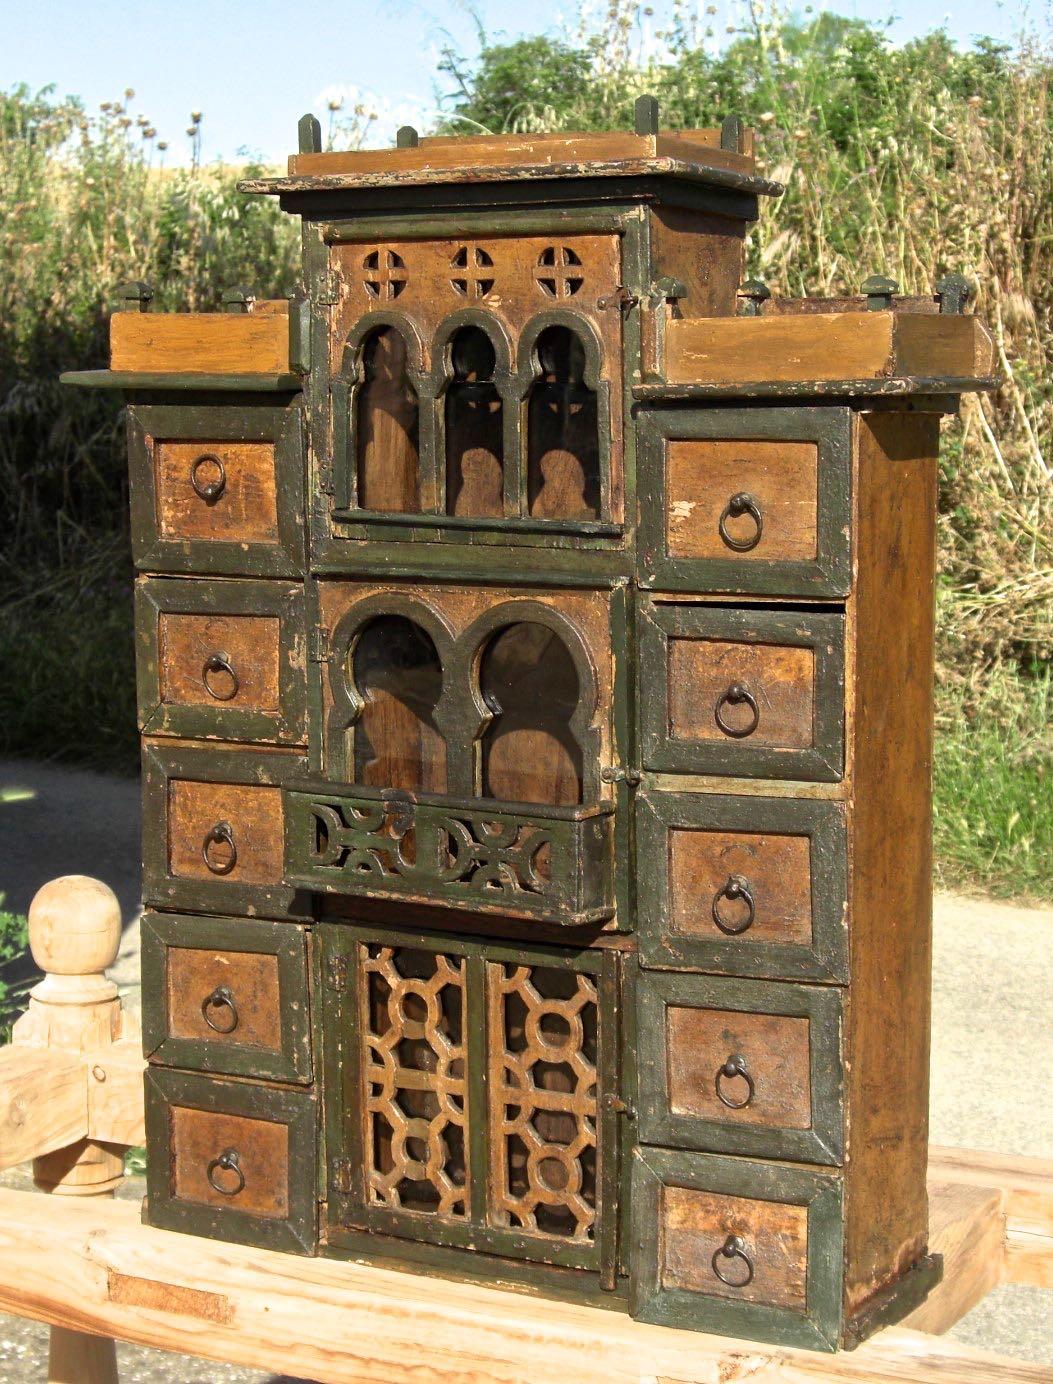 A whimsical late 19th century hanging Neo-Moorish spice cabinet from Granada, Spain.

Featuring 10 drawers and 3 doors, this 